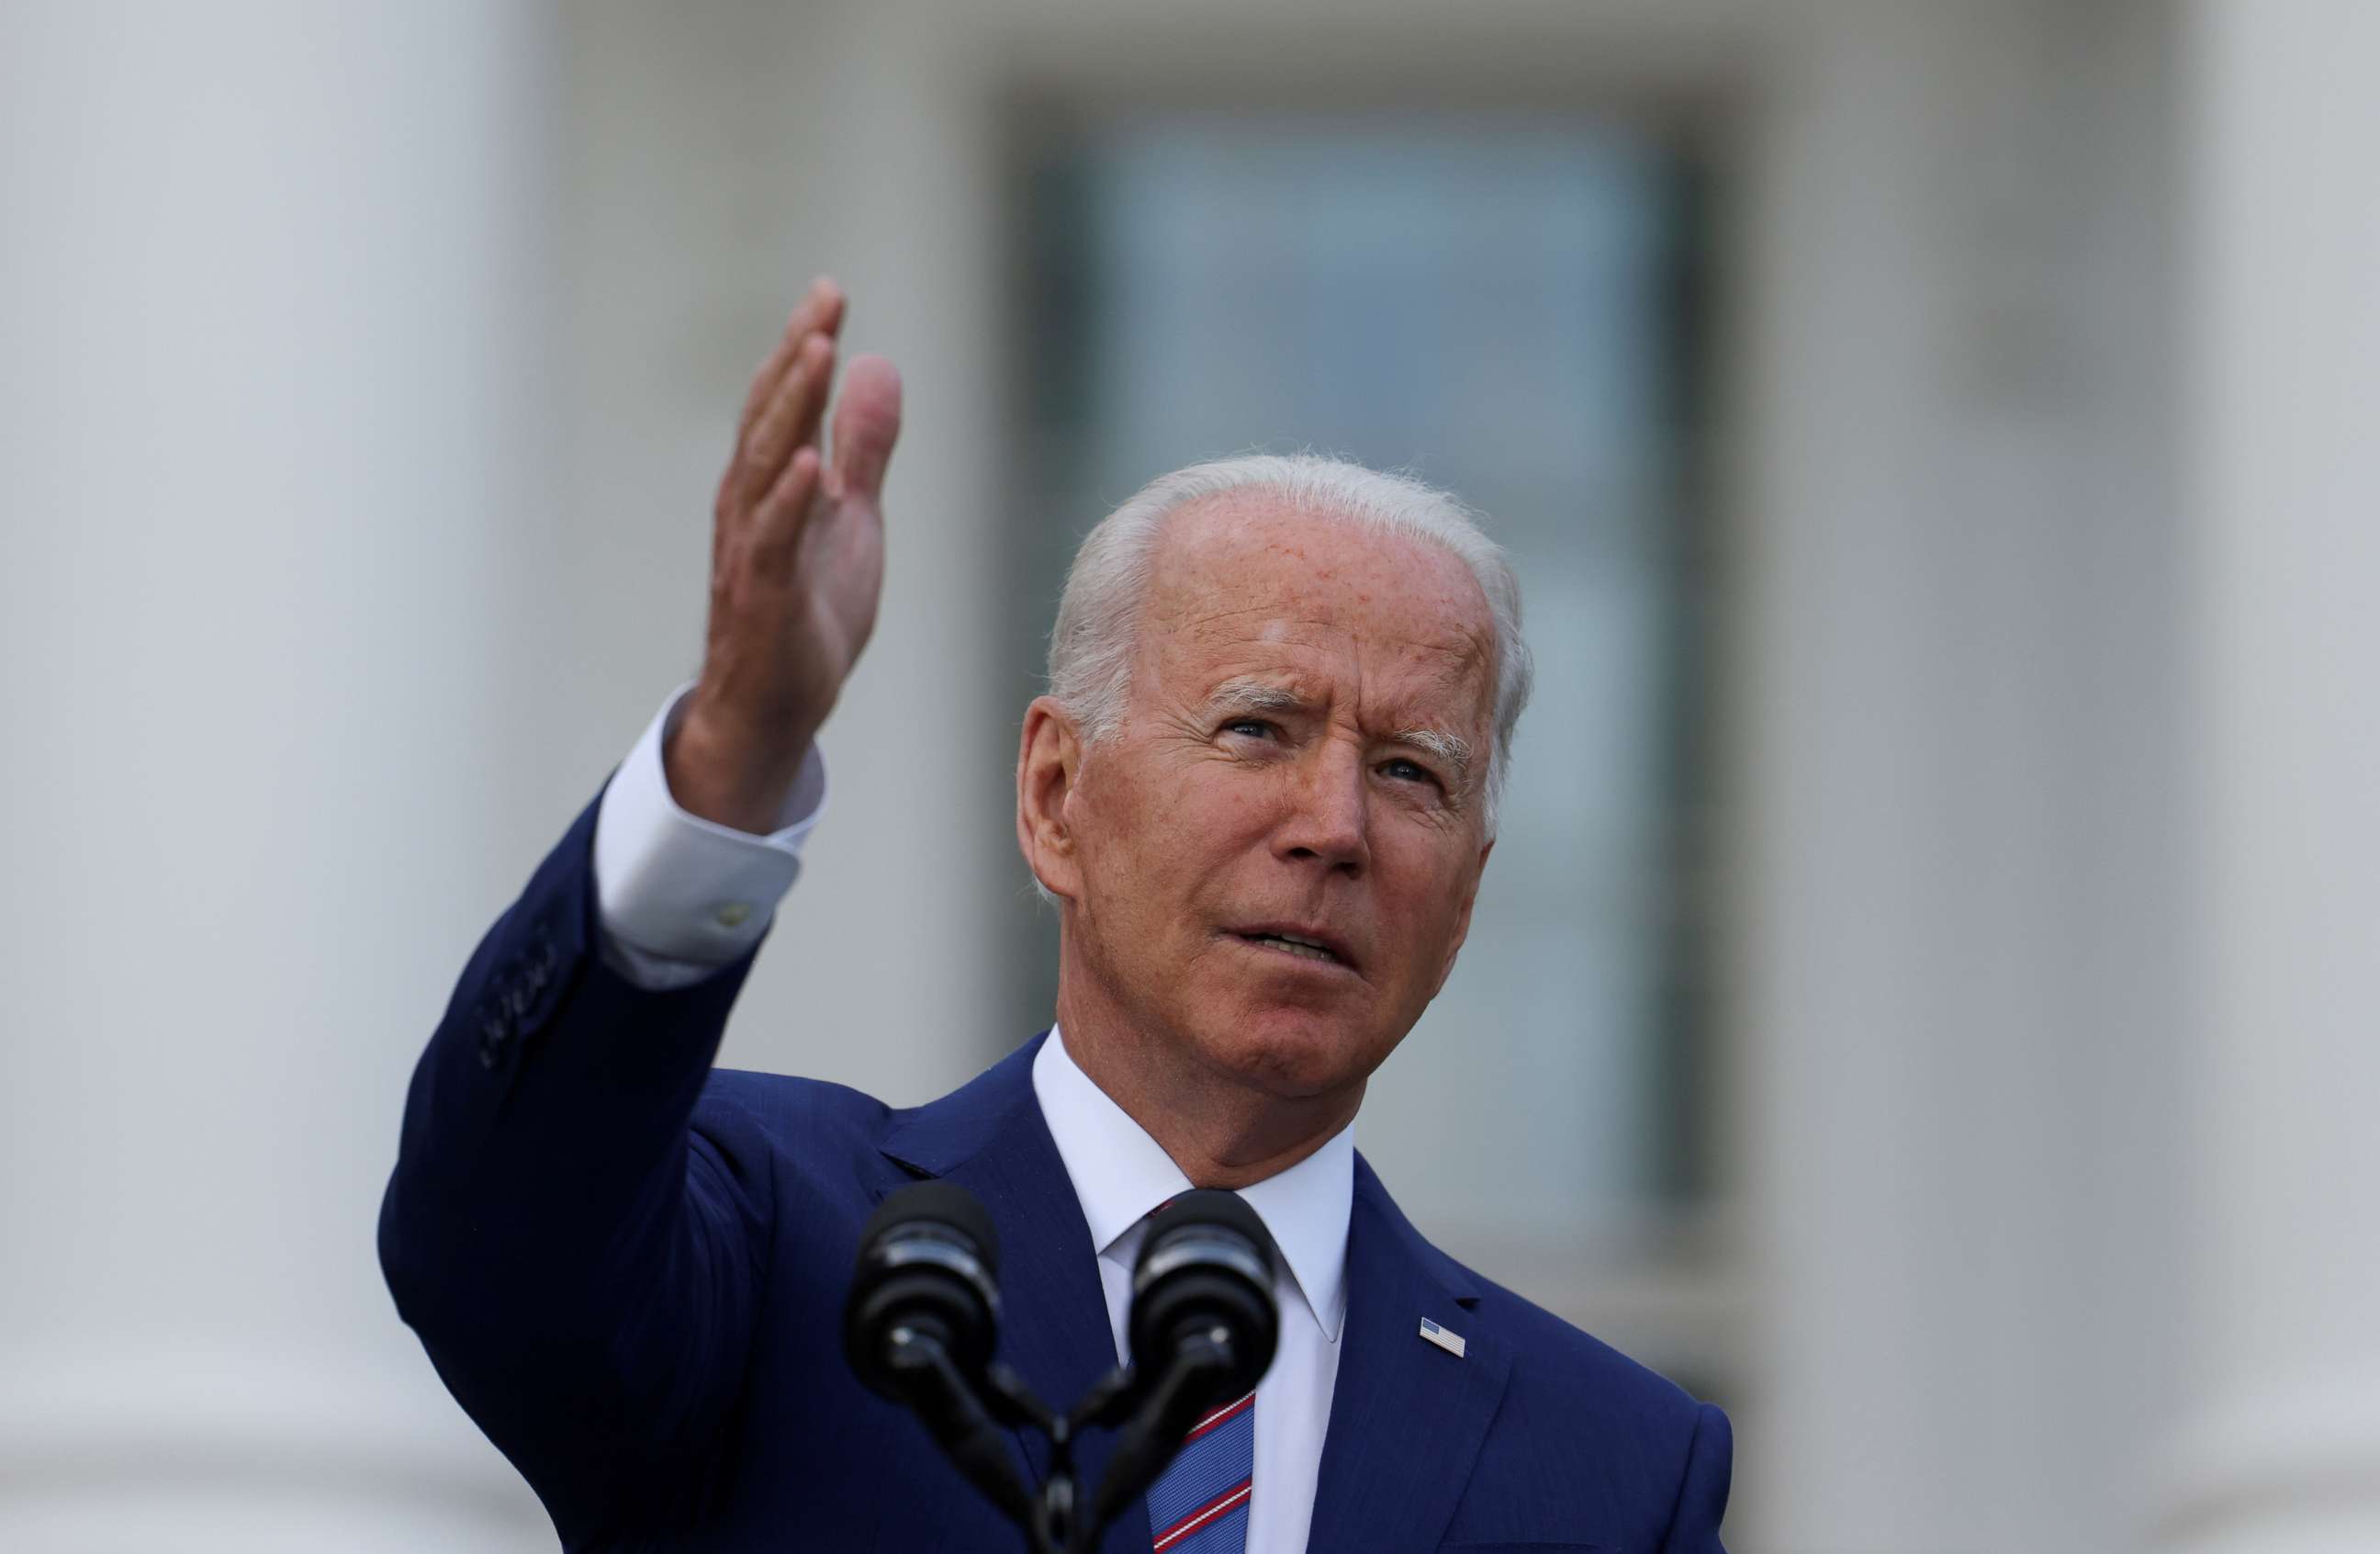 PHOTO: President Joe Biden delivers remarks at the White House in Washington, July 4, 2021.